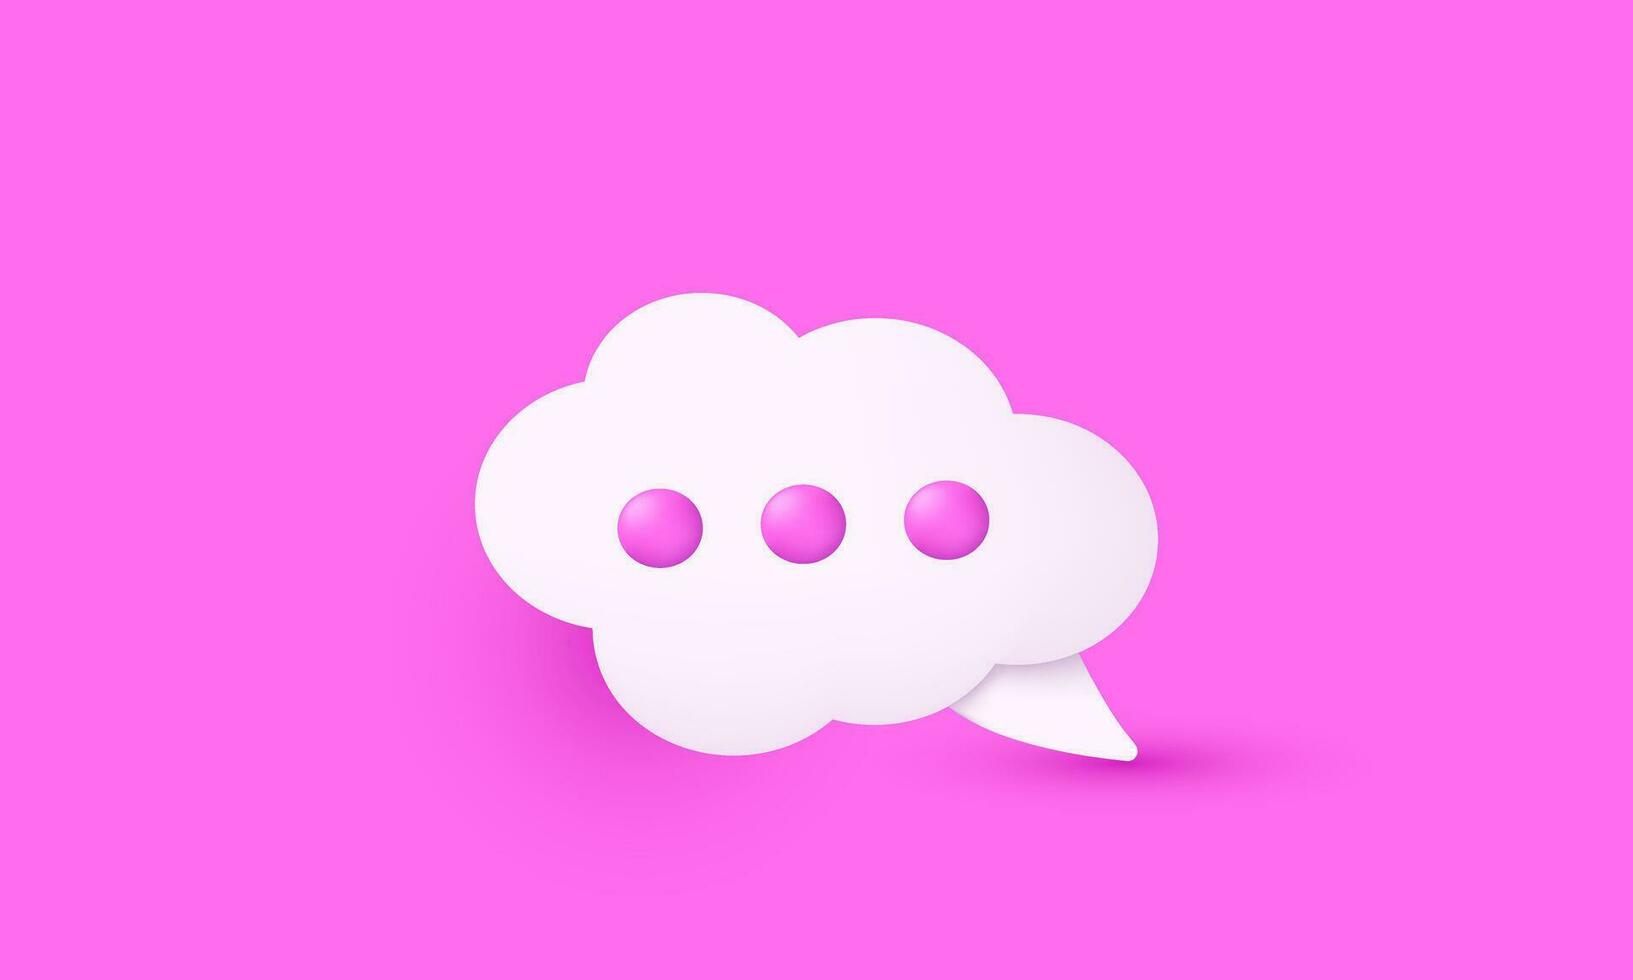 modern 3d realistic pink speech cloud bubble chat illustration trendy icon style object symbols isolated on background vector